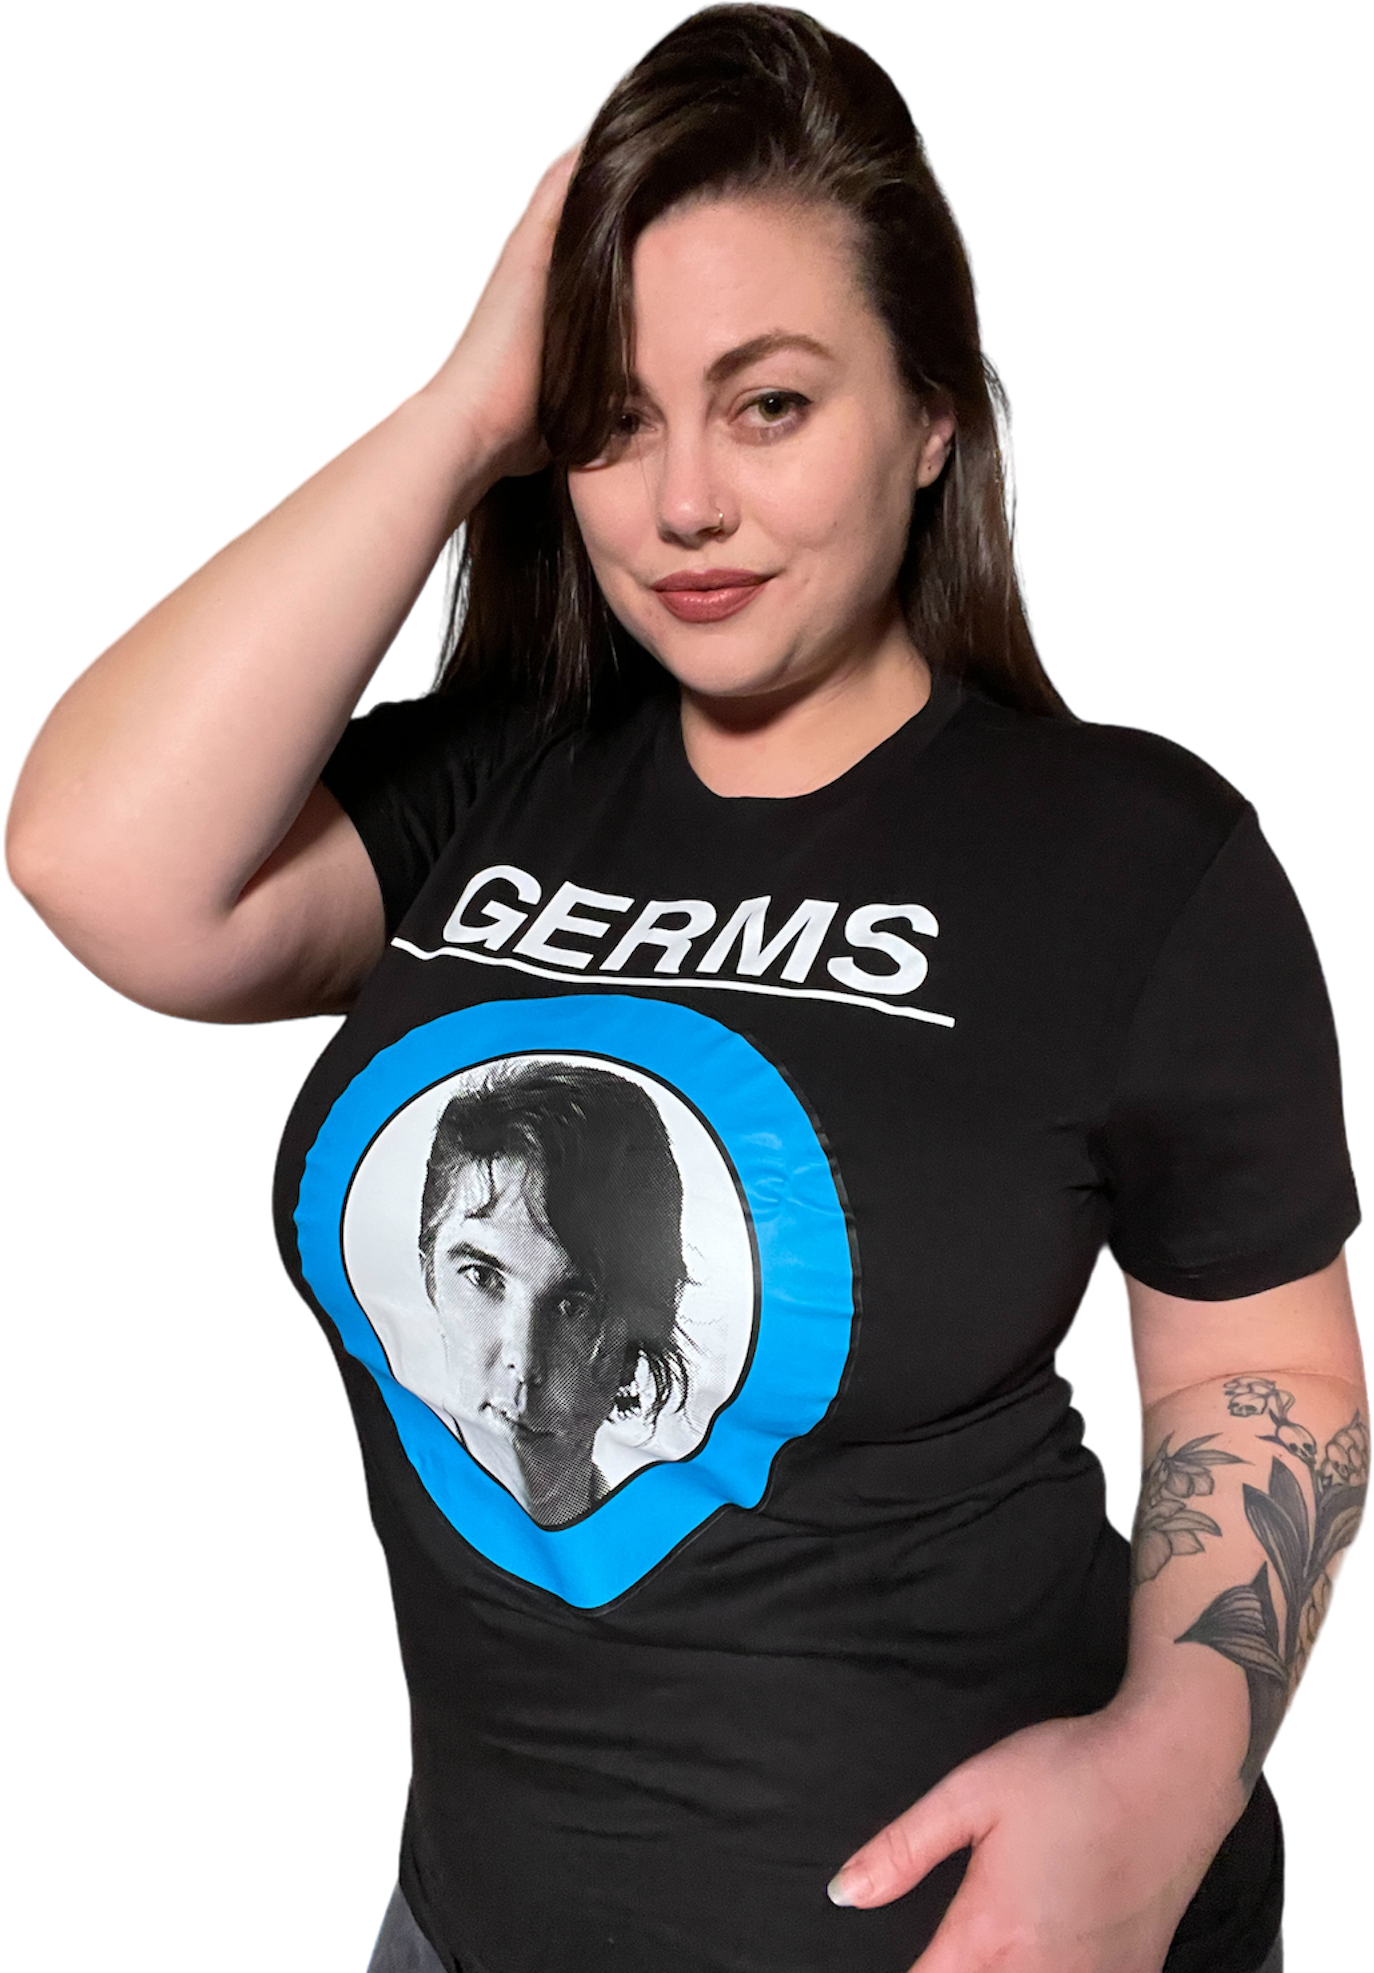 GERMS "DARBY" BLACK T-SHIRT